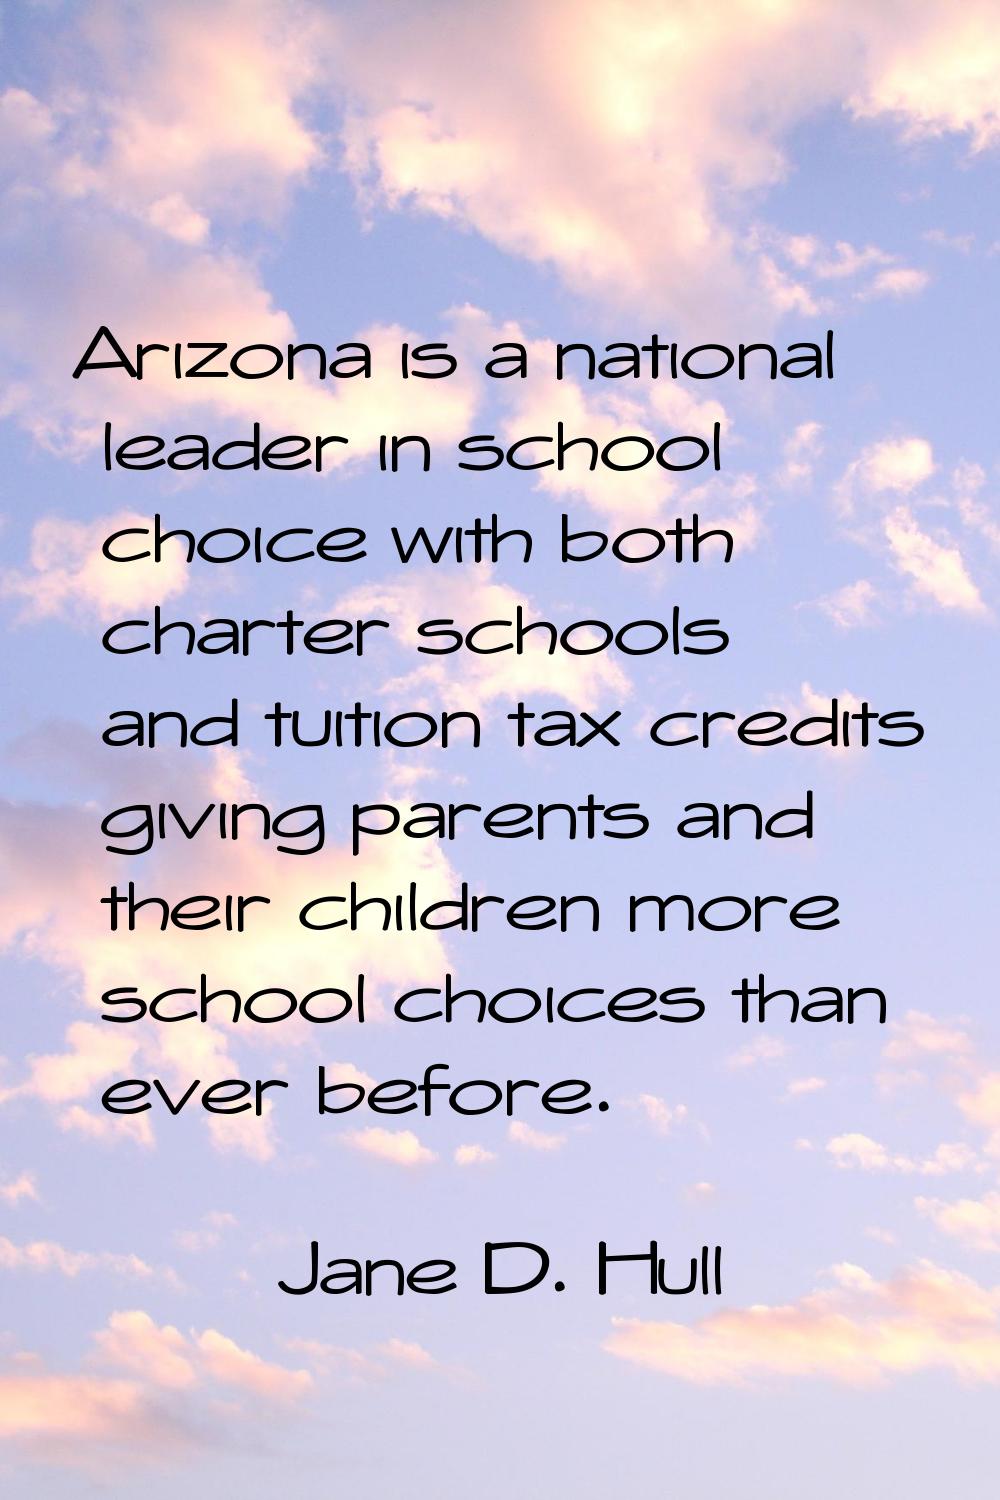 Arizona is a national leader in school choice with both charter schools and tuition tax credits giv